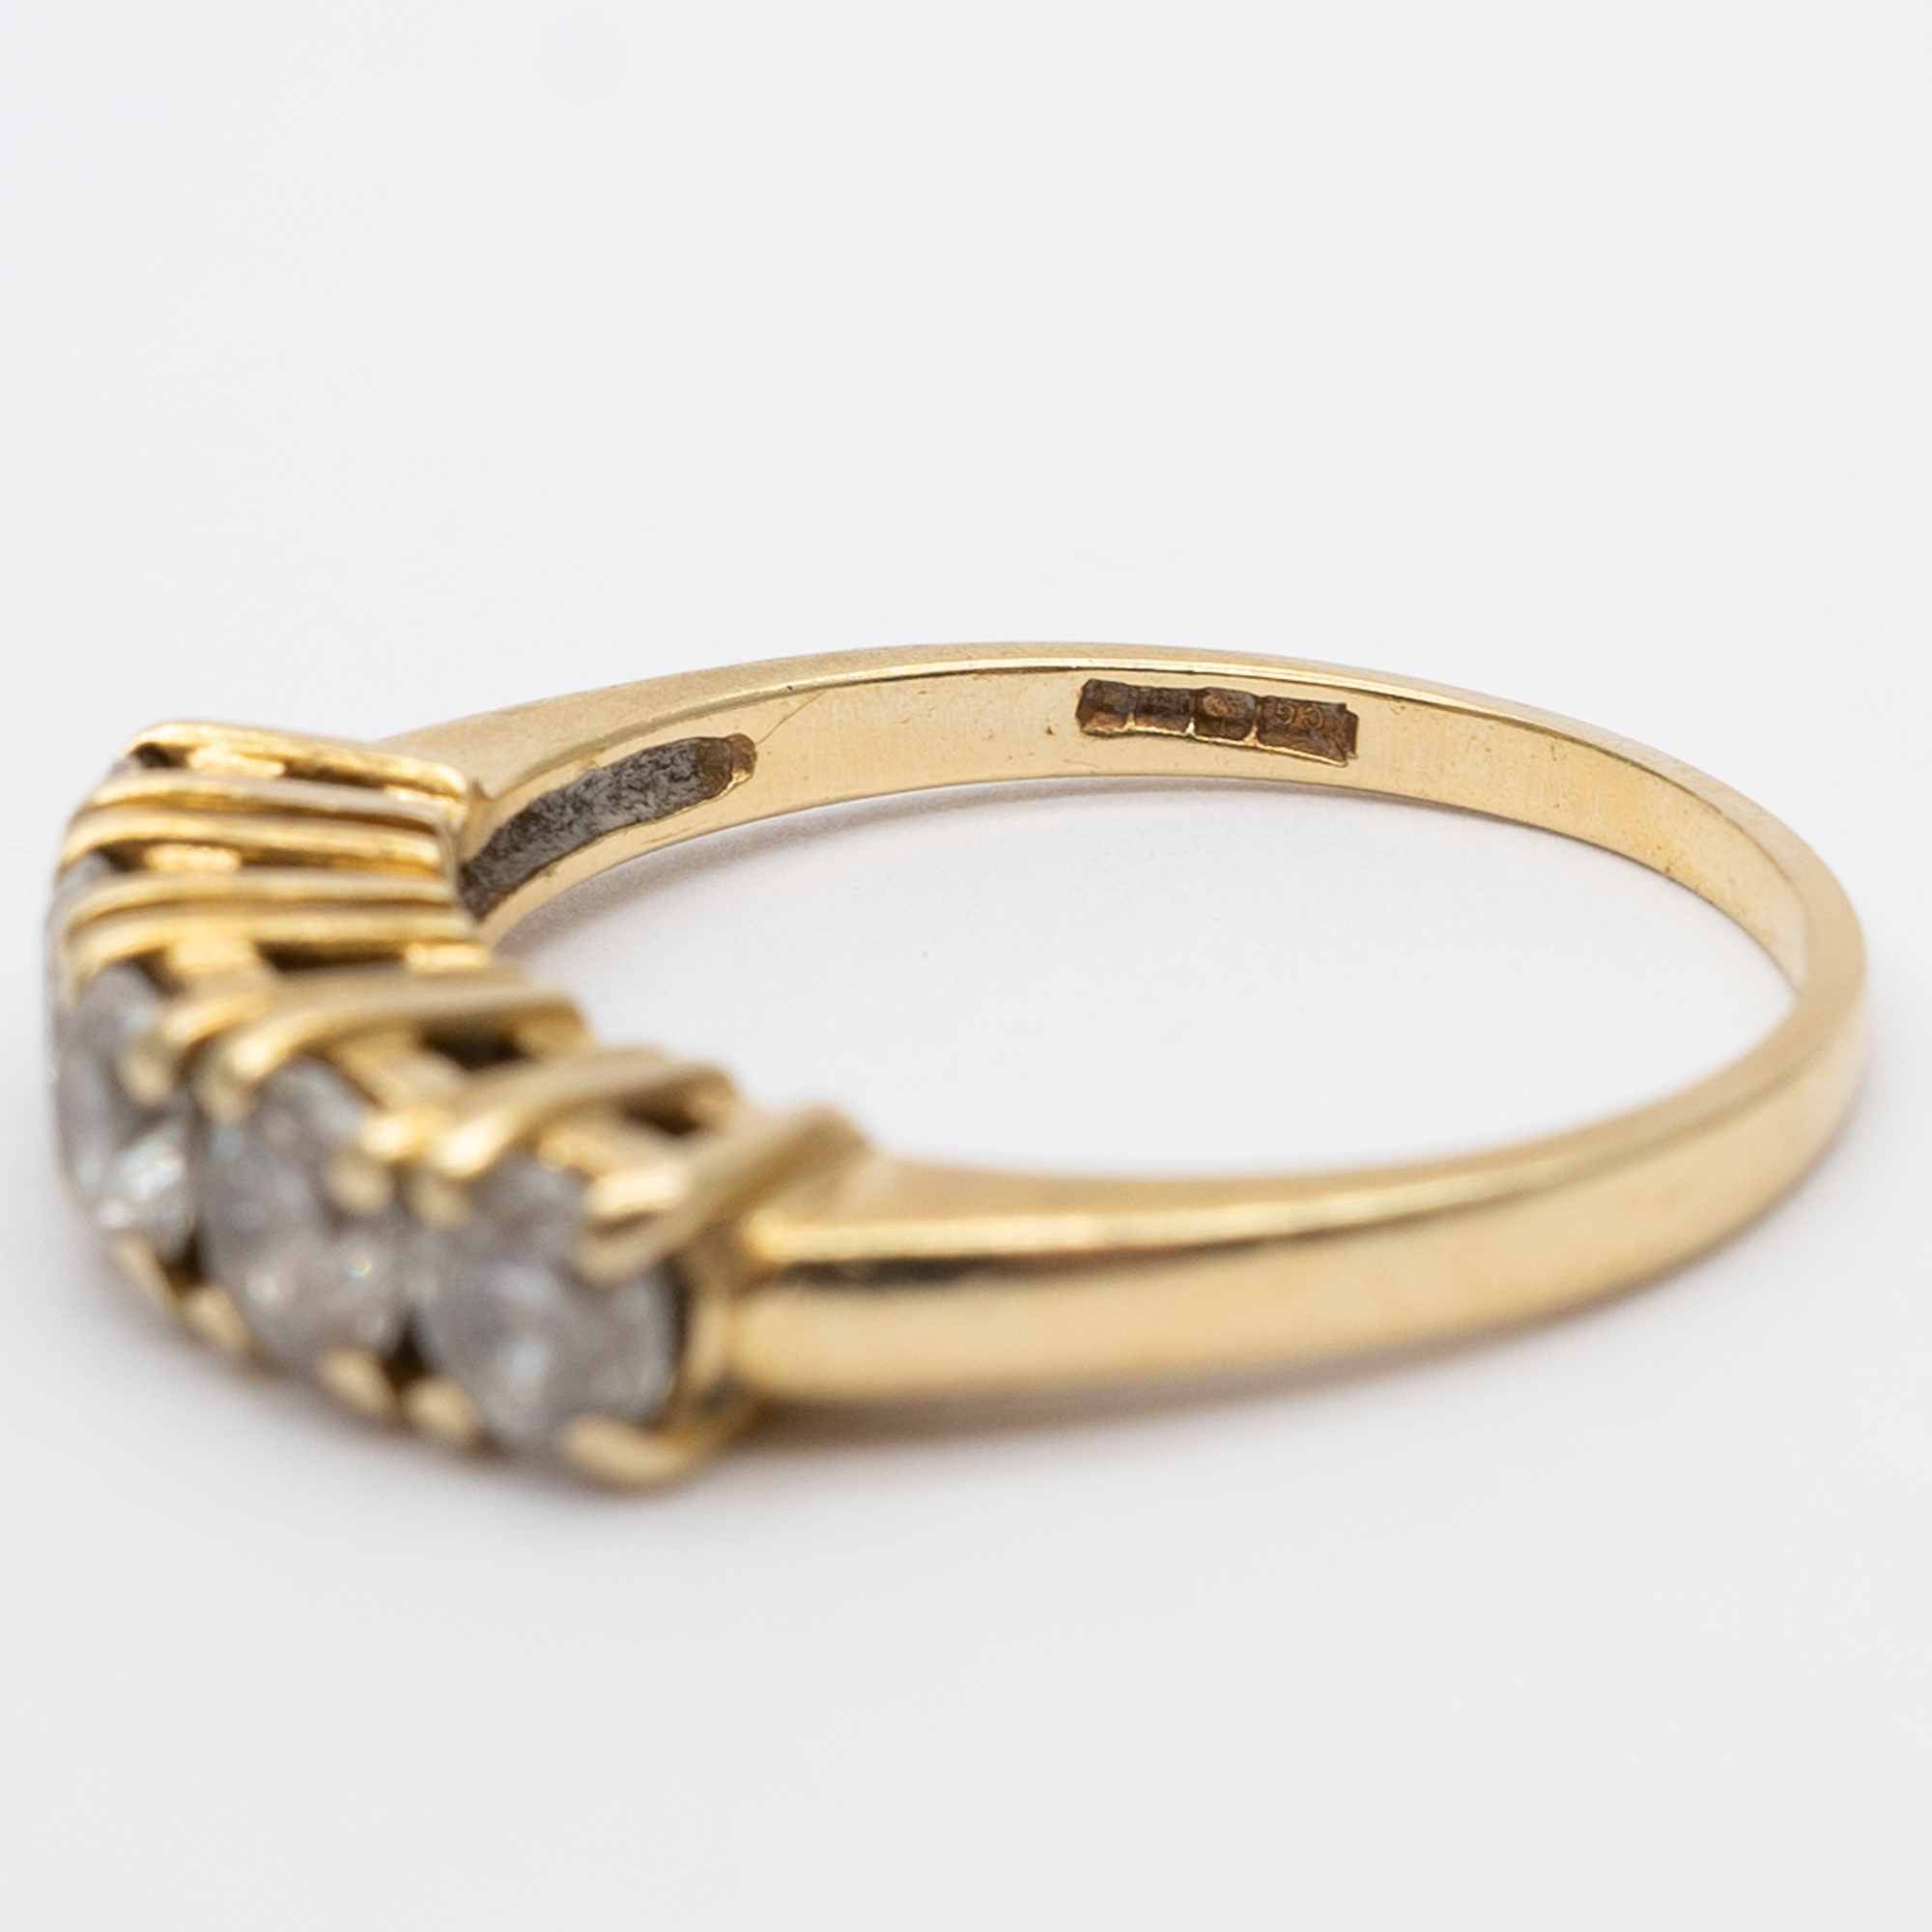 A 14ct yellow gold cz set eternity ring - Image 3 of 6